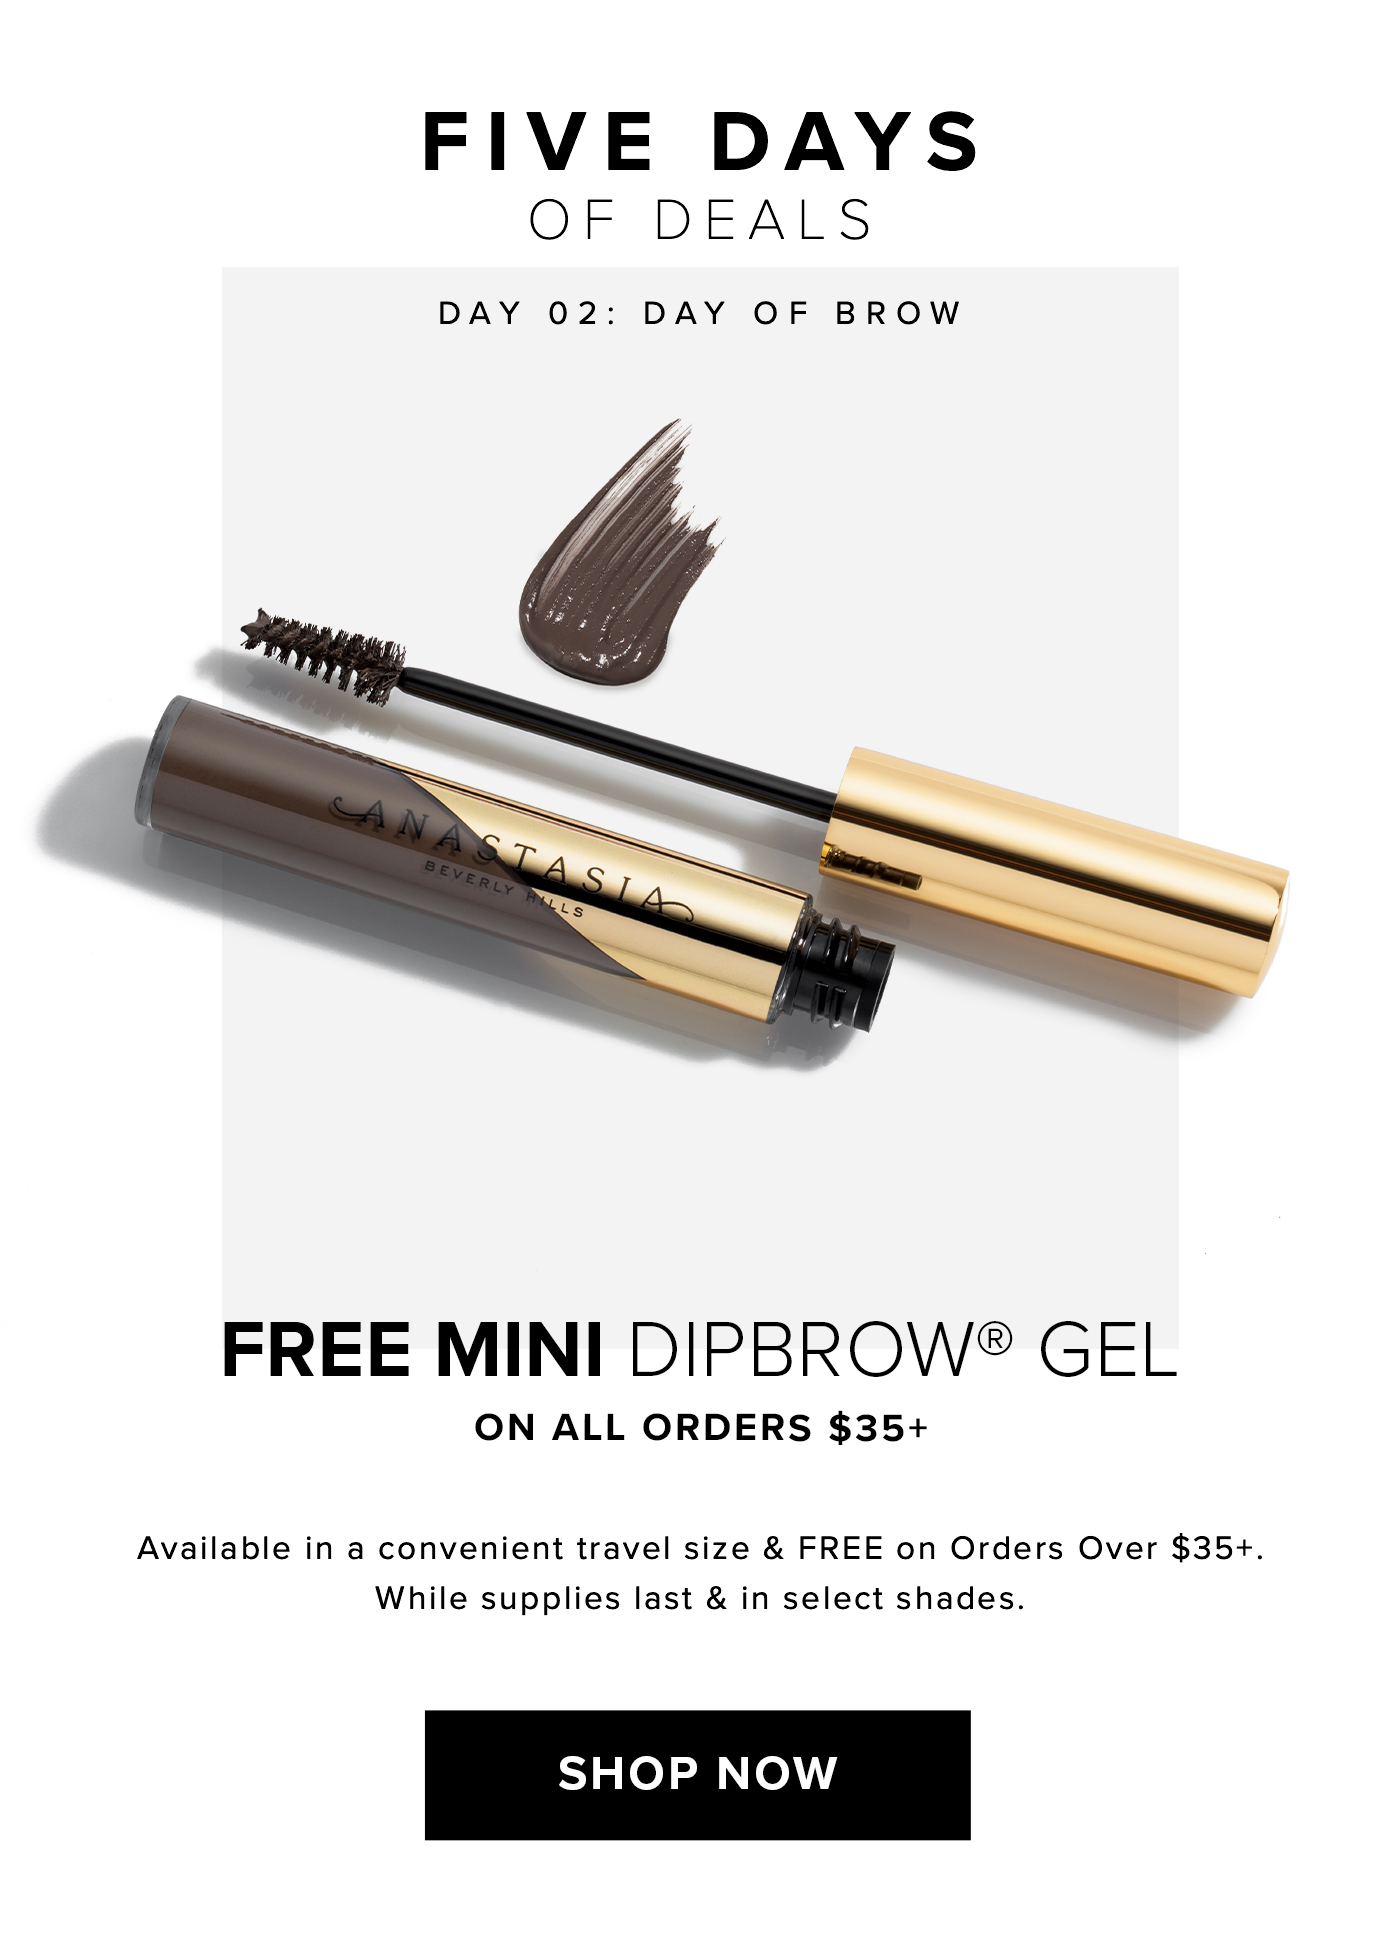 FIVE DAYS OF DEALS DAY 02: DAY OF BROW. FREE MINI DIPBROW GEL ON ALL ORDERS $35+ Available in a convenient travel size & FREE on Orders Over $35+. While Supplies last & in select shades. SHOP NOW